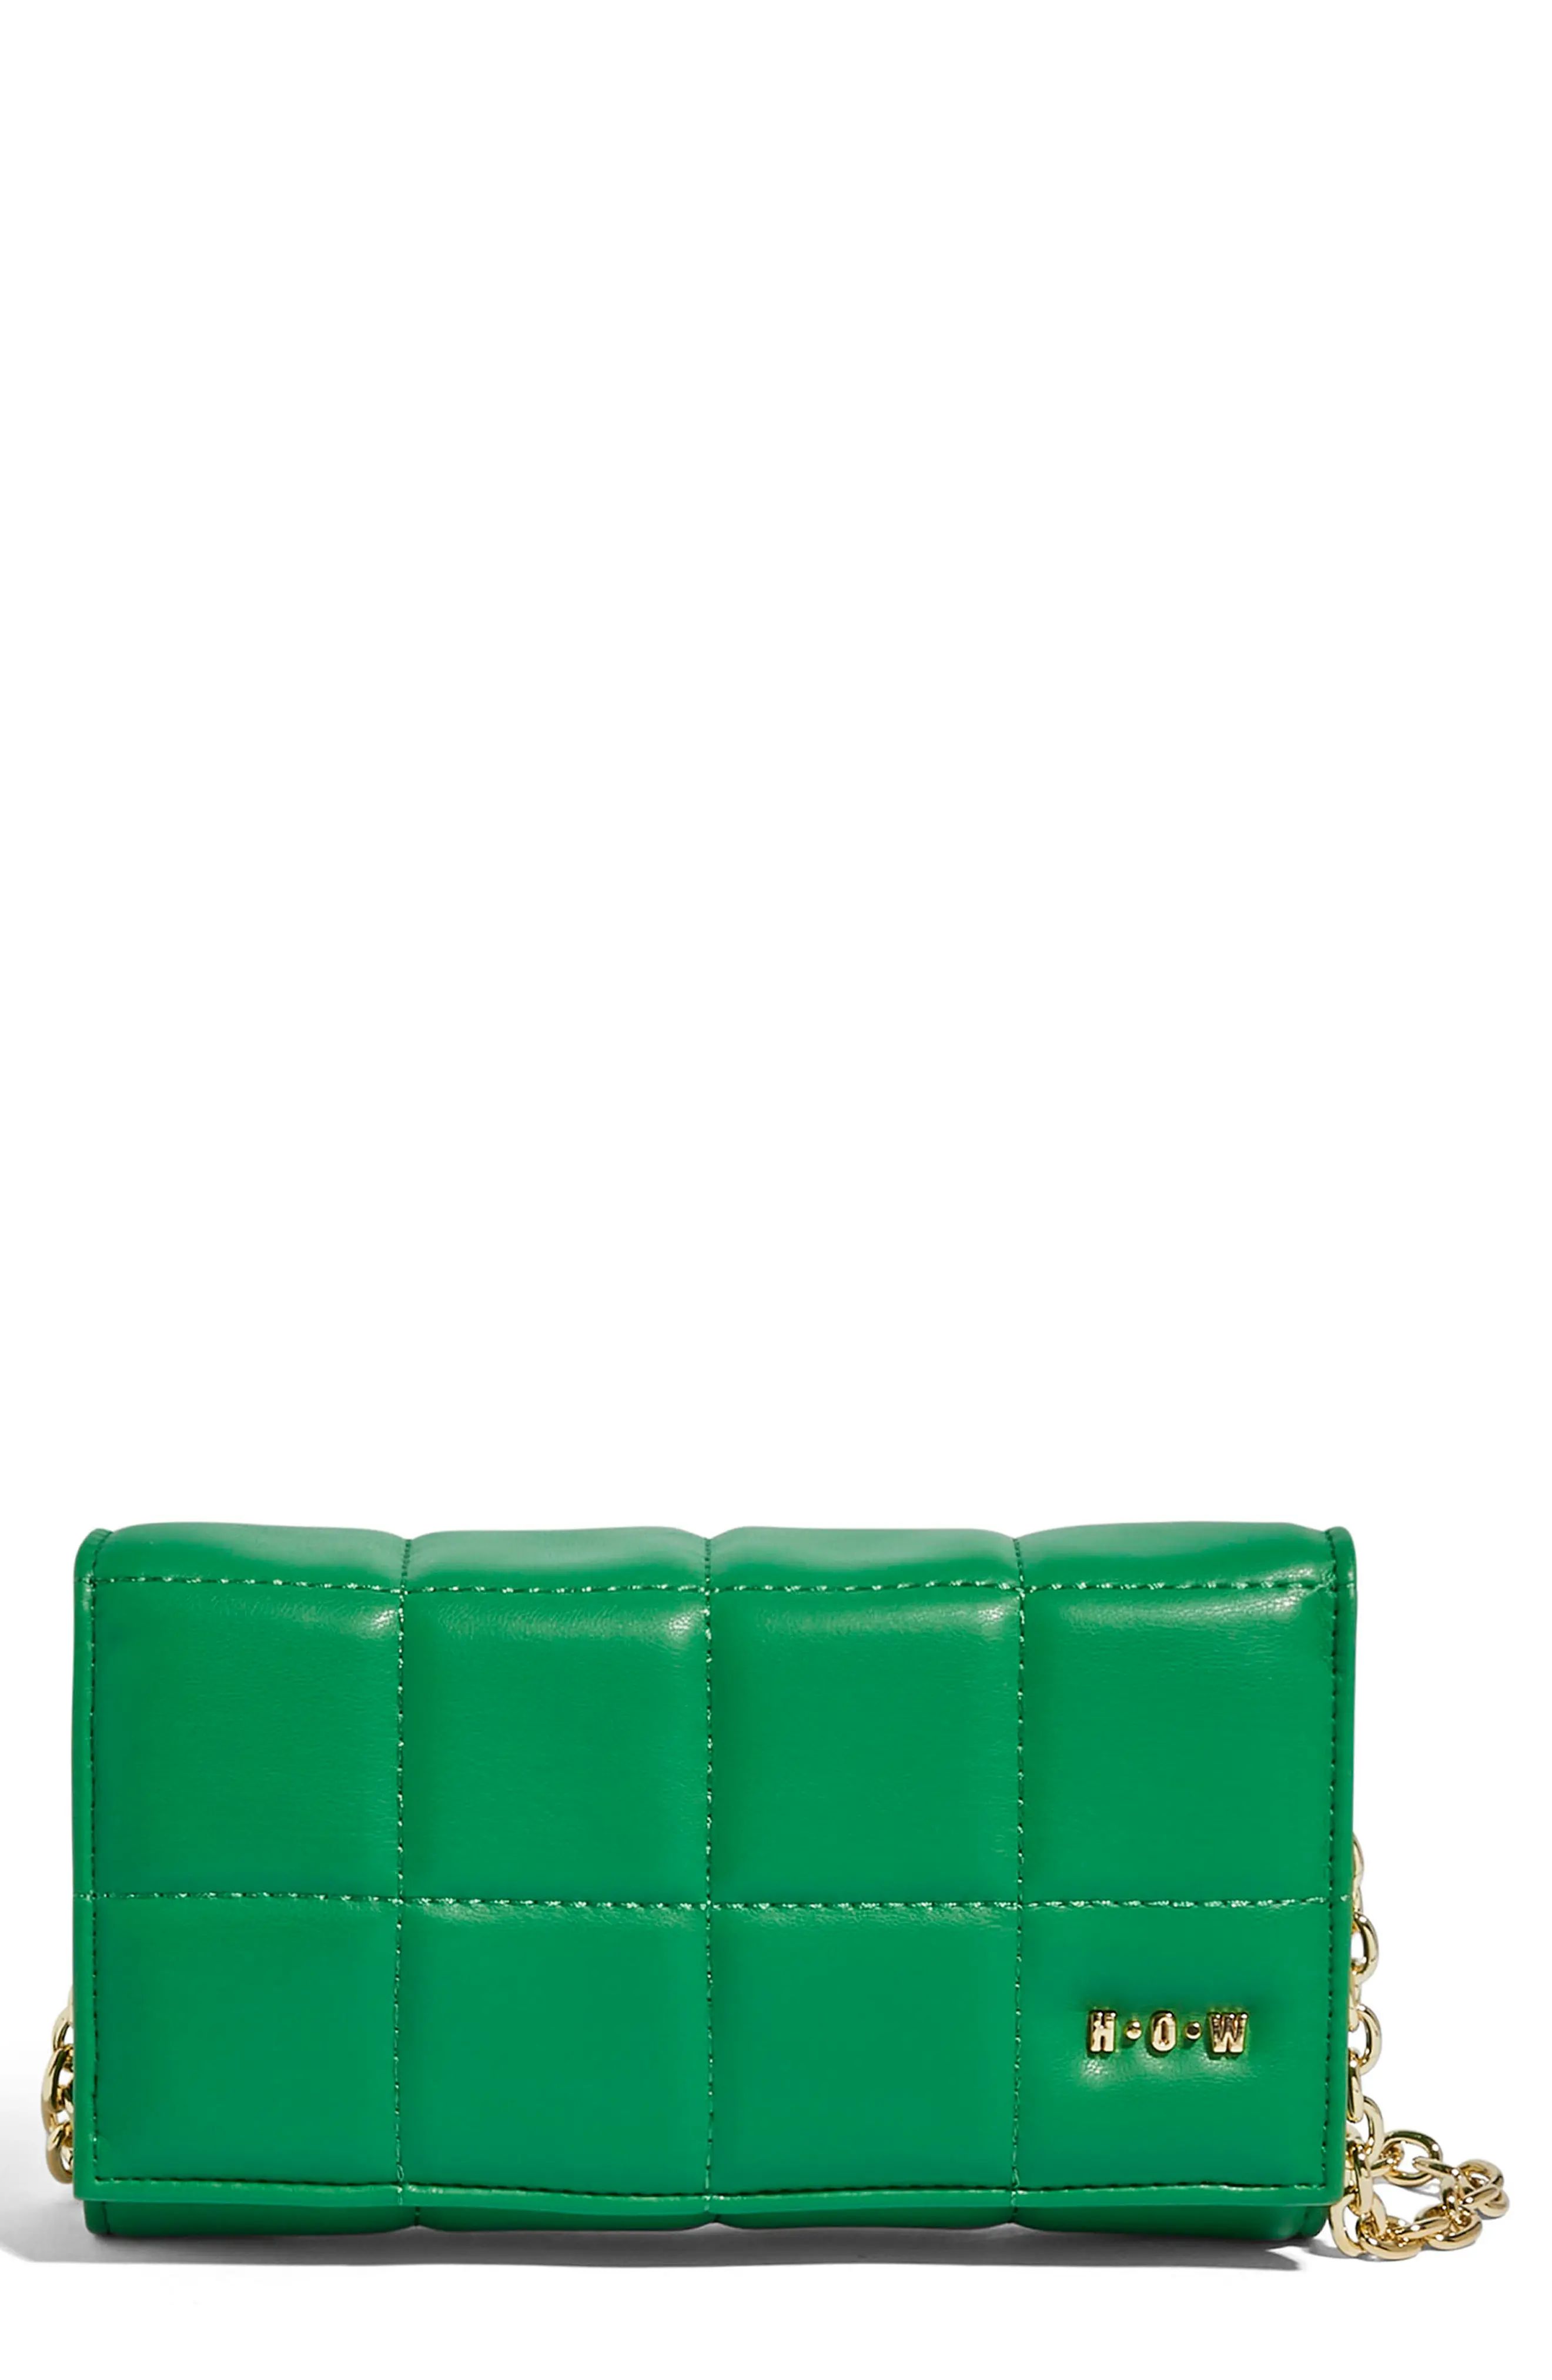 HOUSE OF WANT We Browse Vegan Leather Wallet Crossbody Bag in Green at Nordstrom | Nordstrom